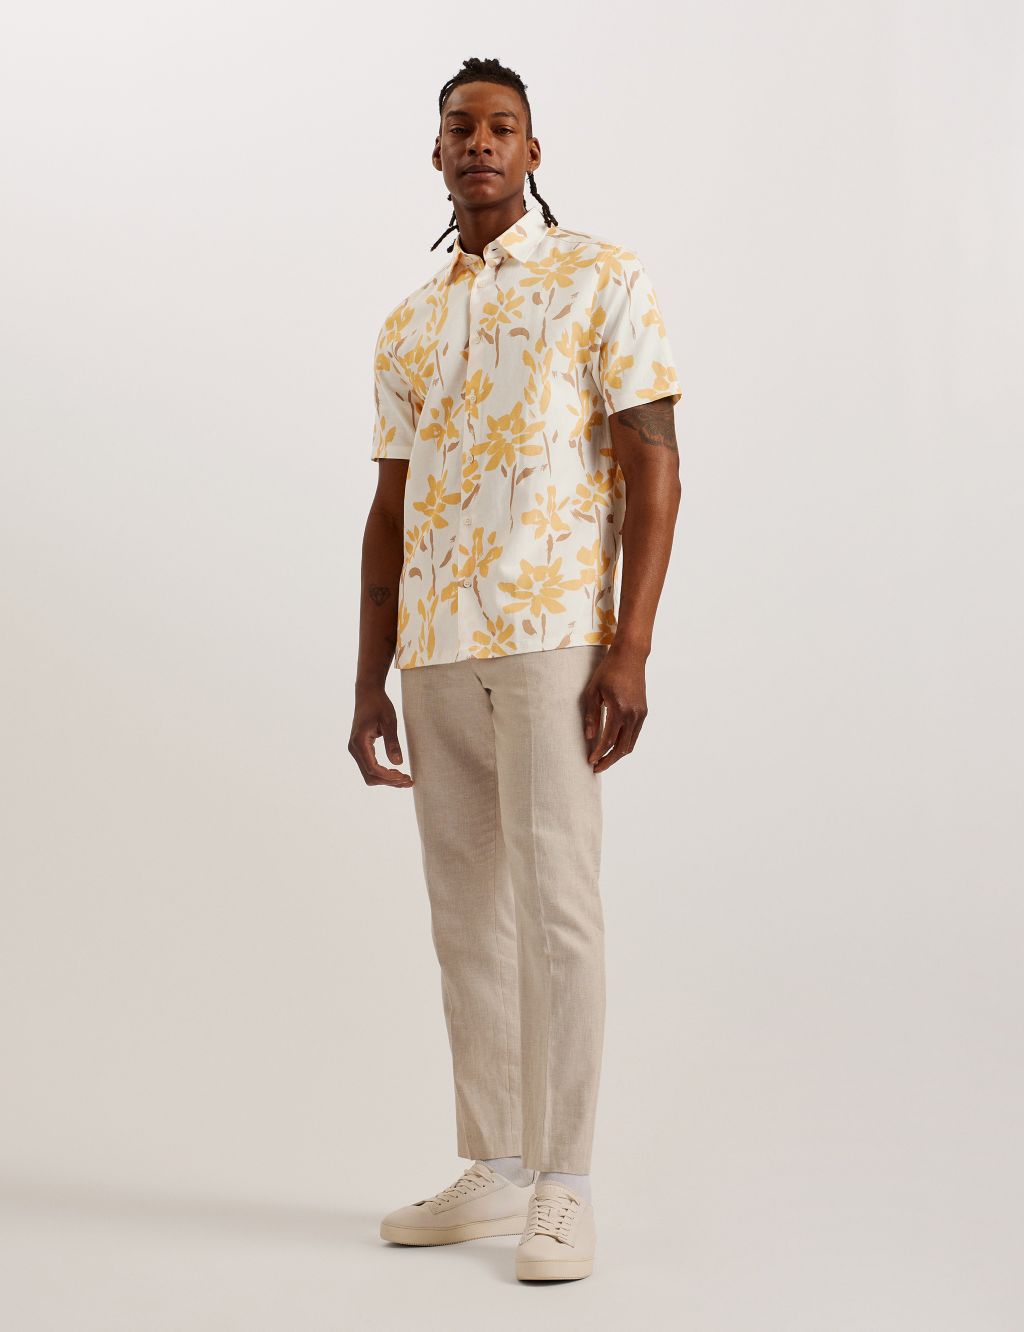 Abstract Floral Shirt with Linen 1 of 3